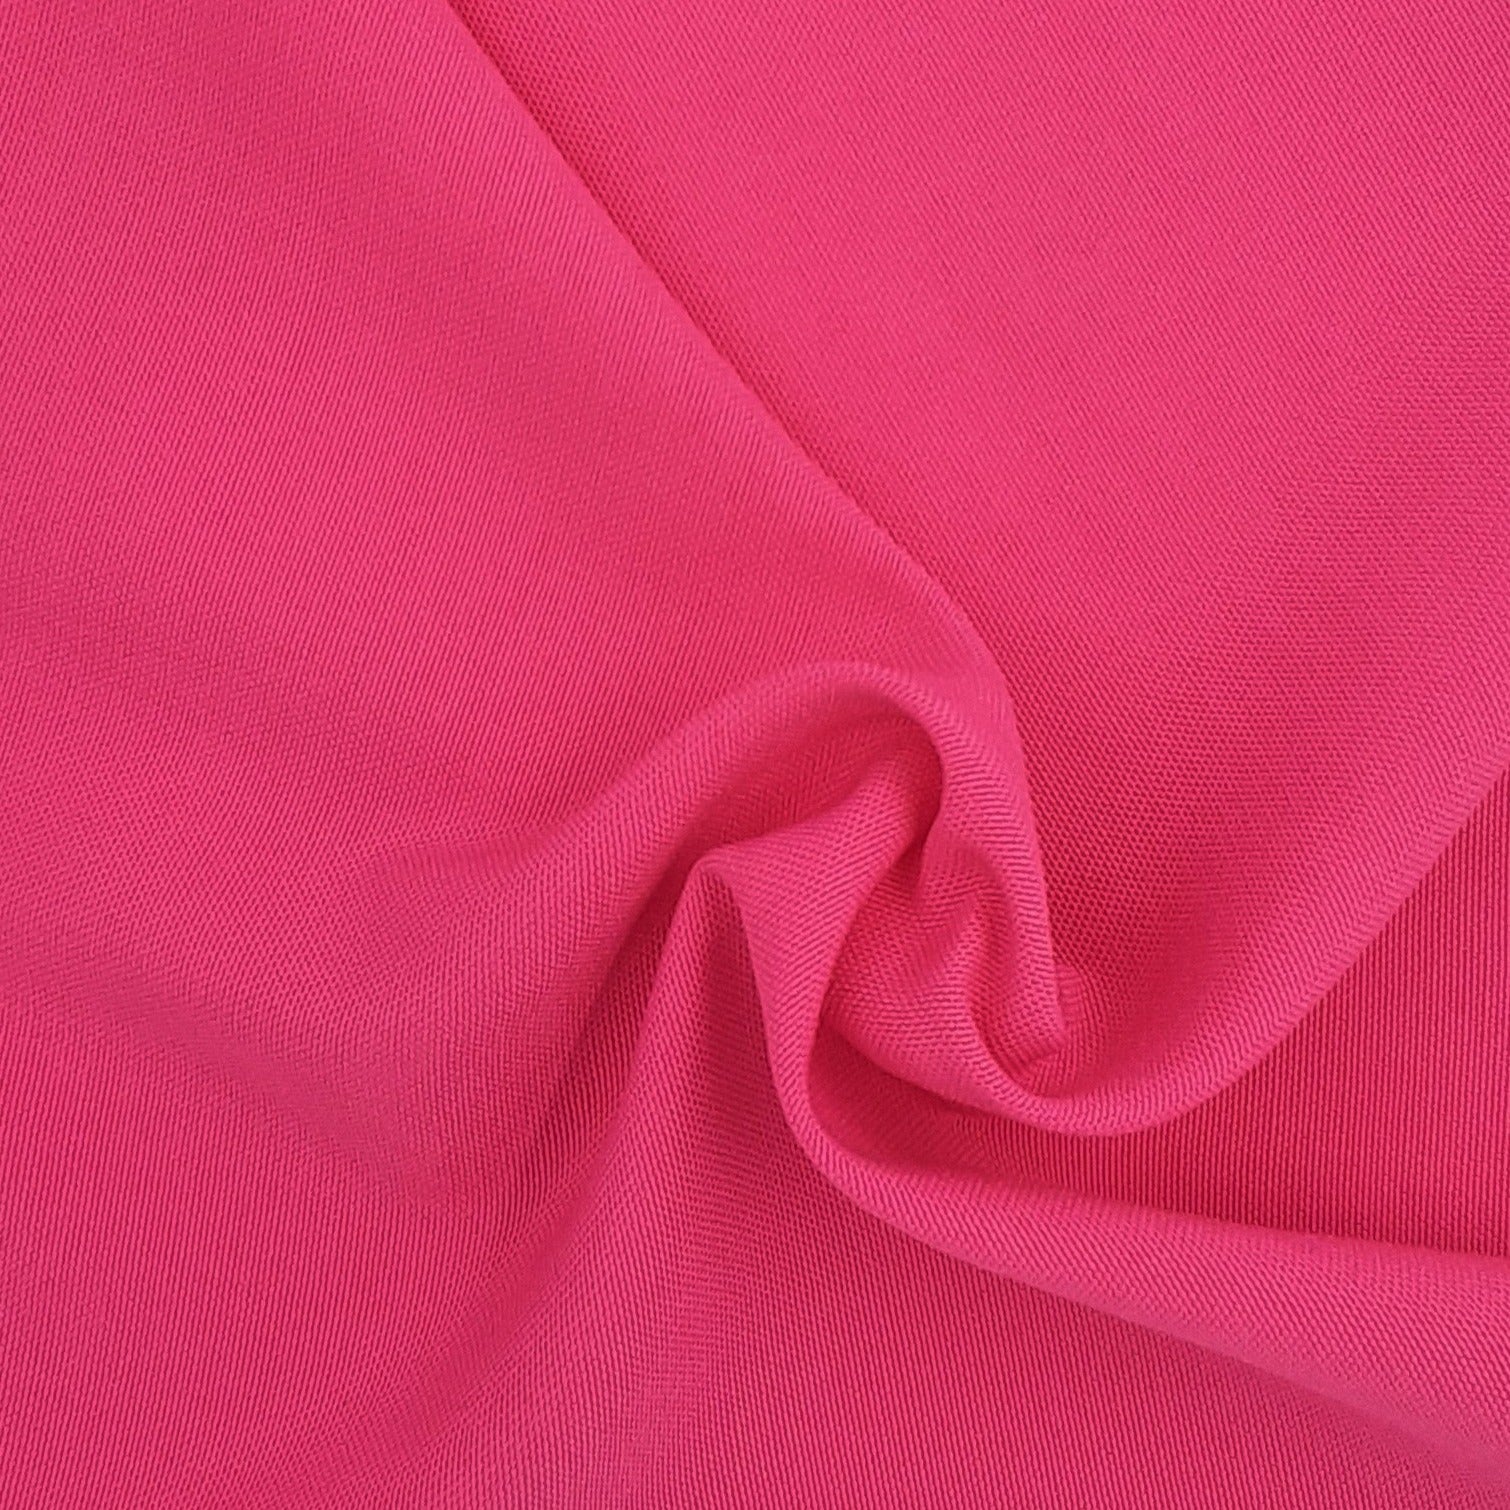 Pink #S811 Cotton Candy Polyester/Rayon Suiting Woven Fabric - SKU 6879A